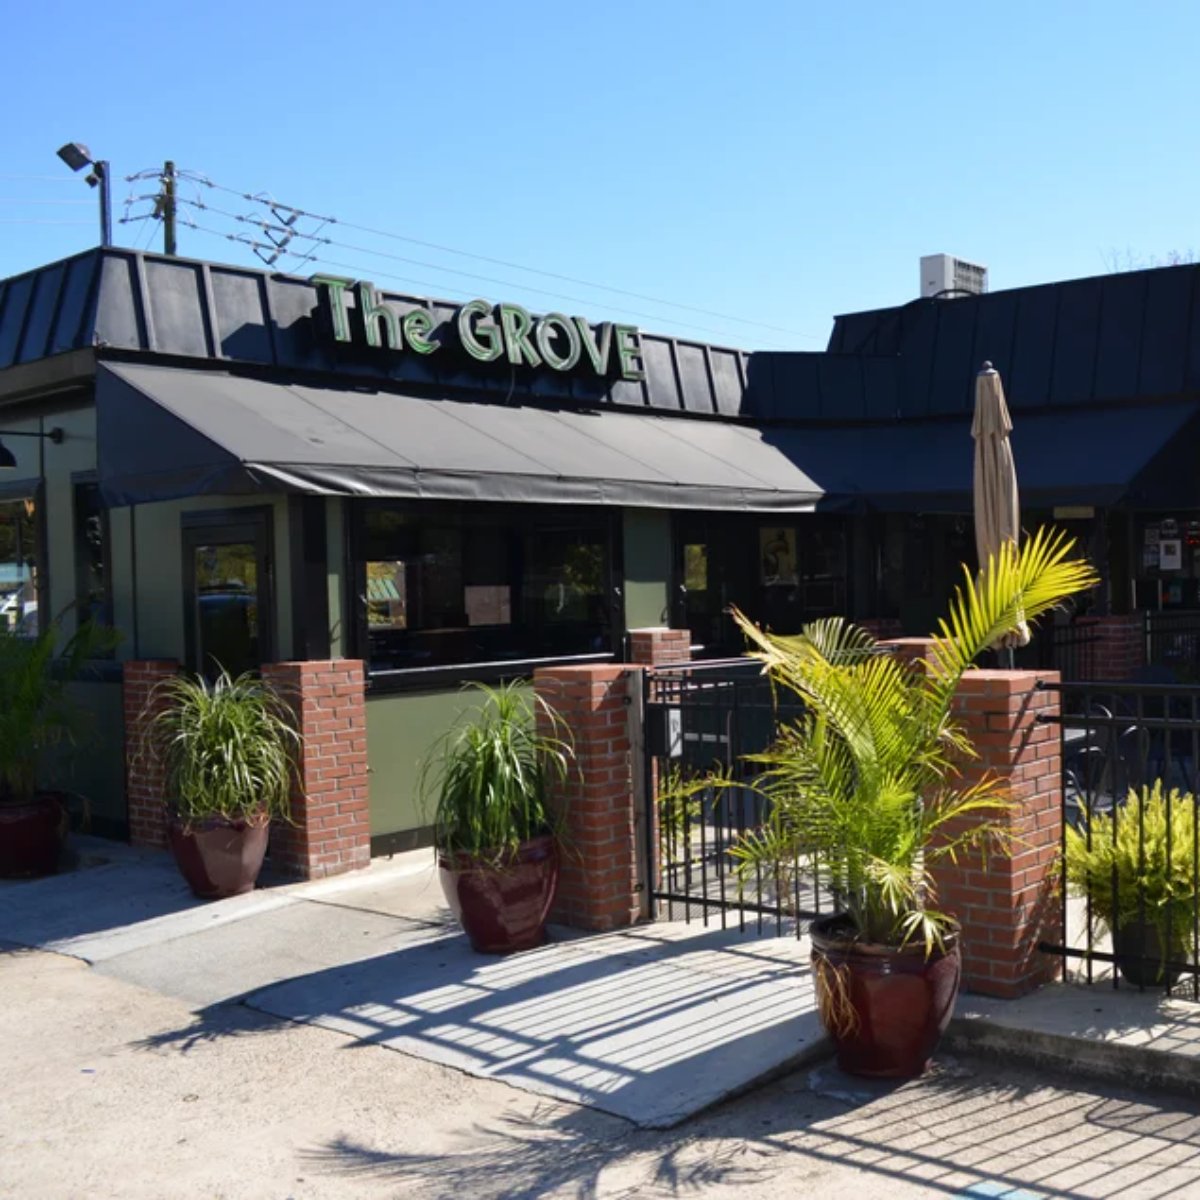 When you want service that makes you feel like an old friend, just stop by our place and get to know our crew! #TheGroveRestaurant #NeighborhoodBar #Beer #TheGrove #Burgers #EatLocal